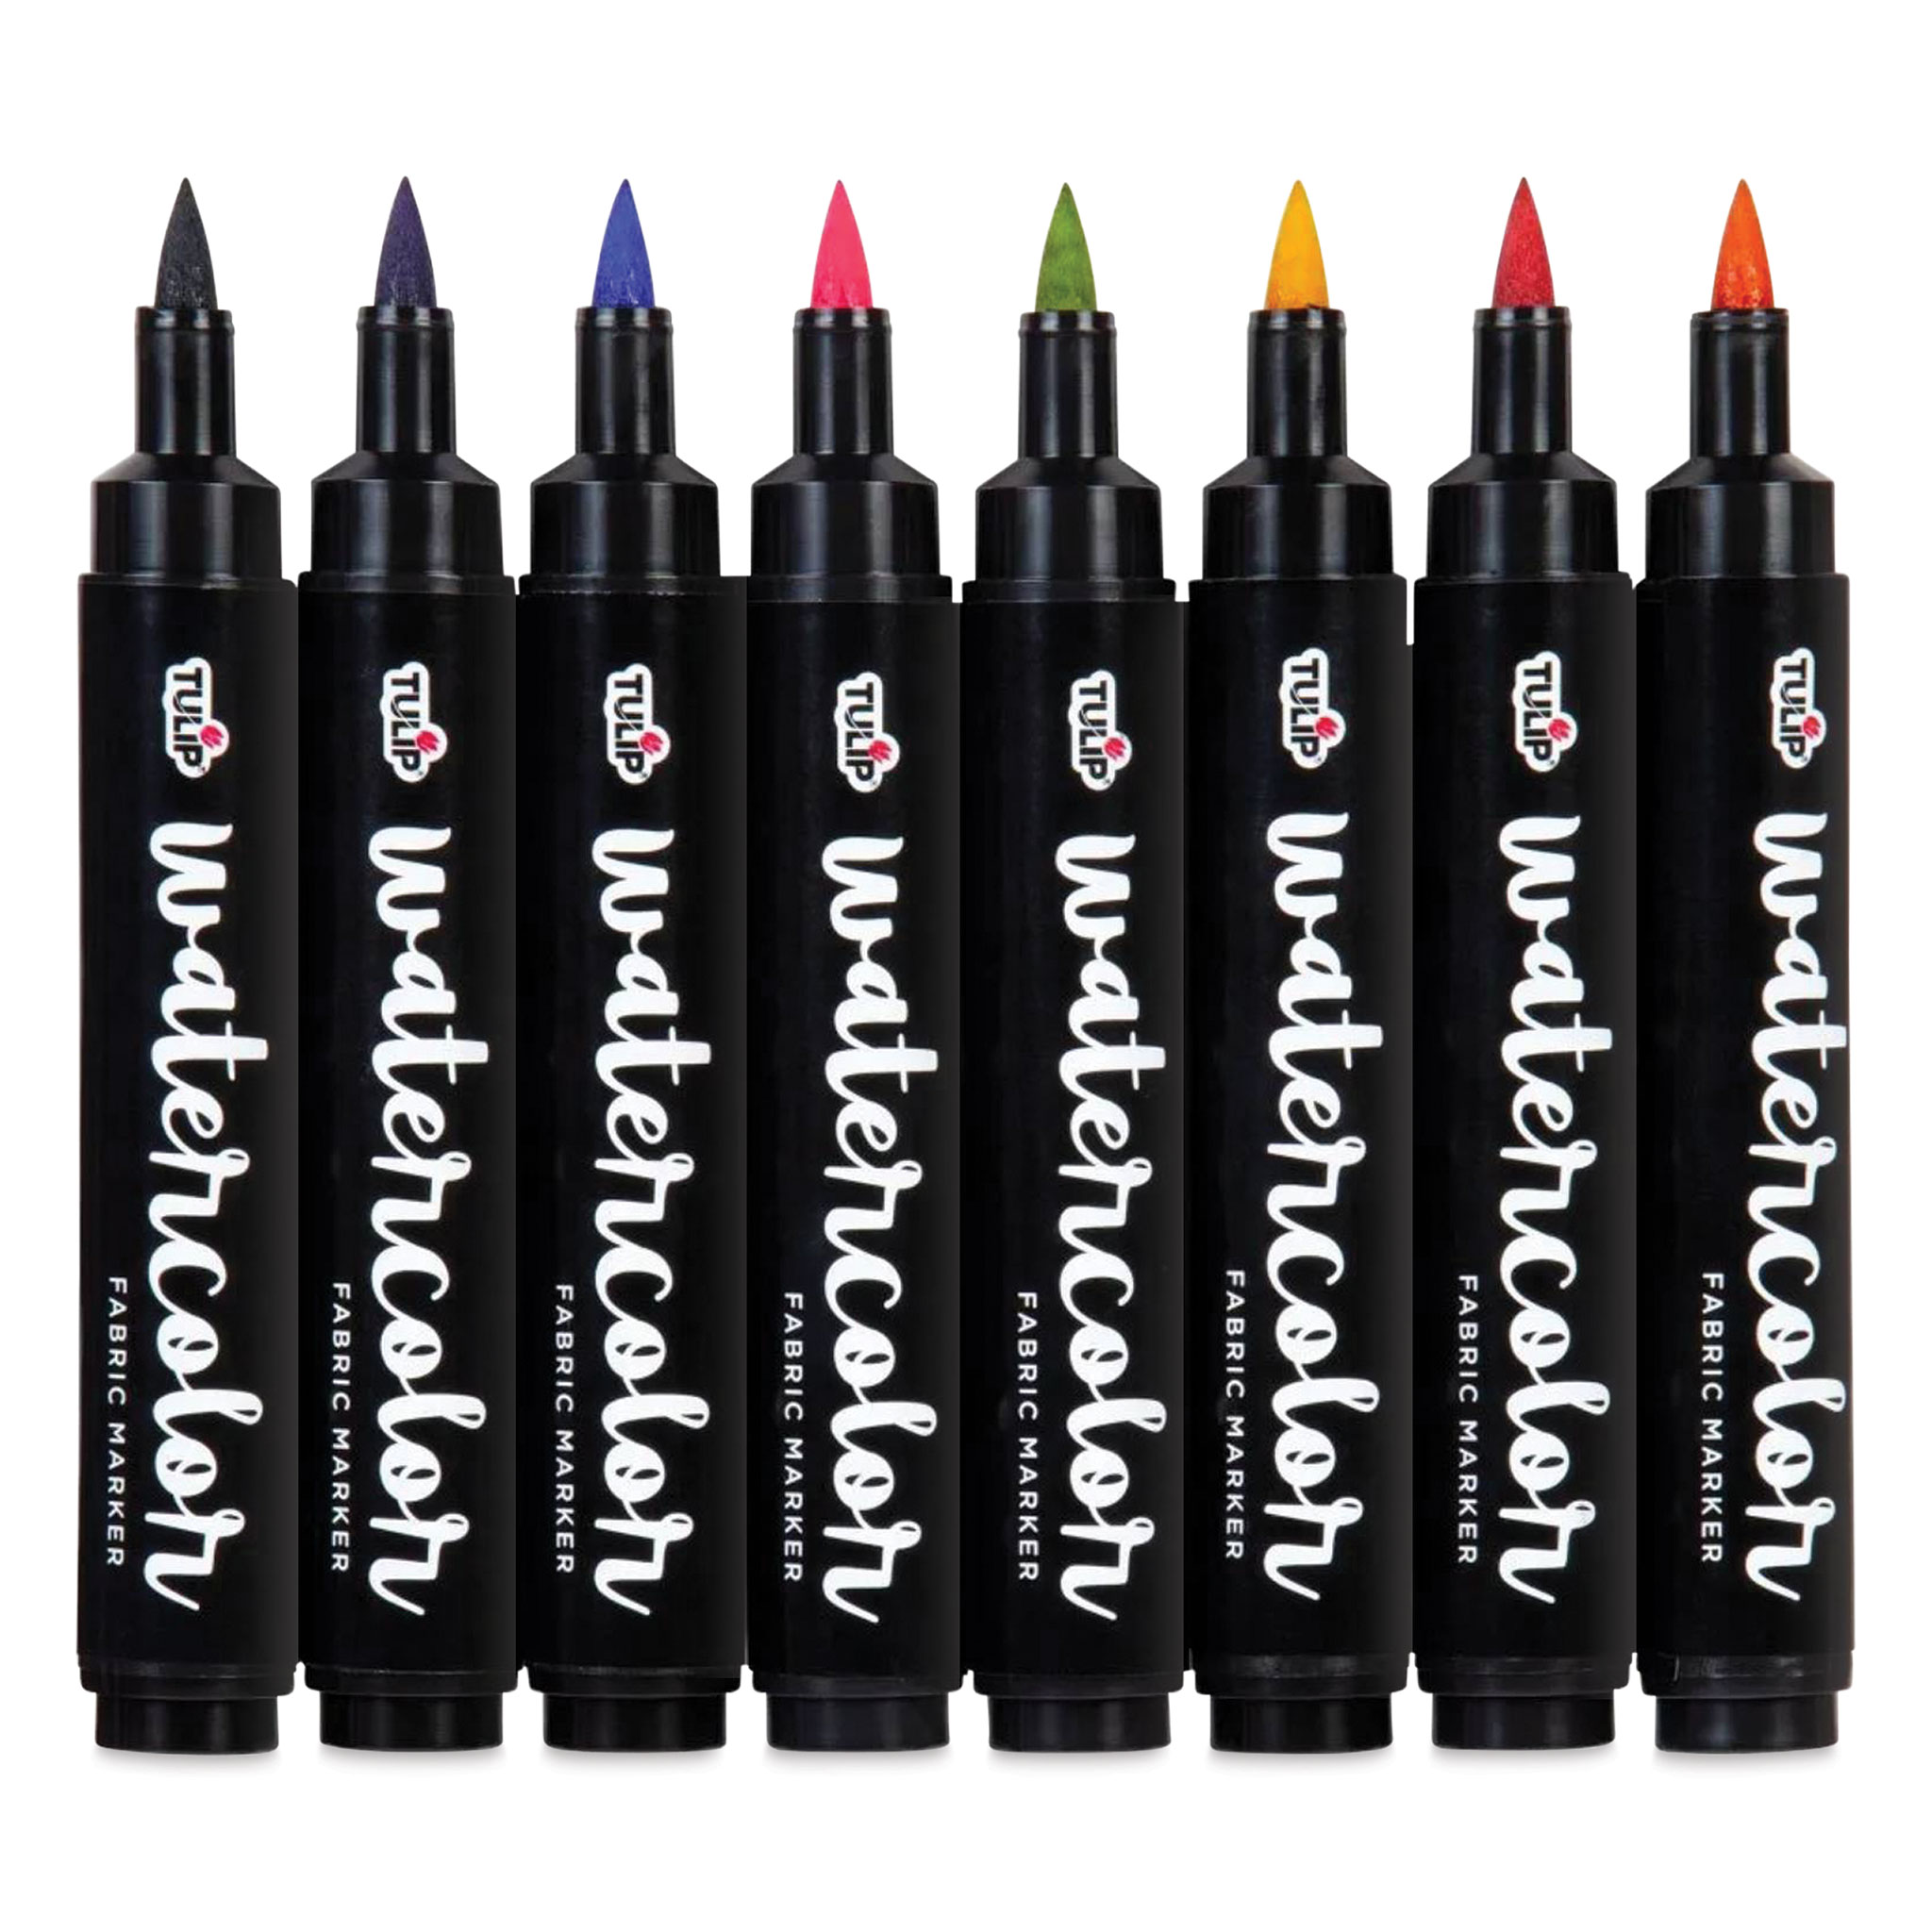 Choose Tulip Fabric Markers for Bold, Instant Color! 